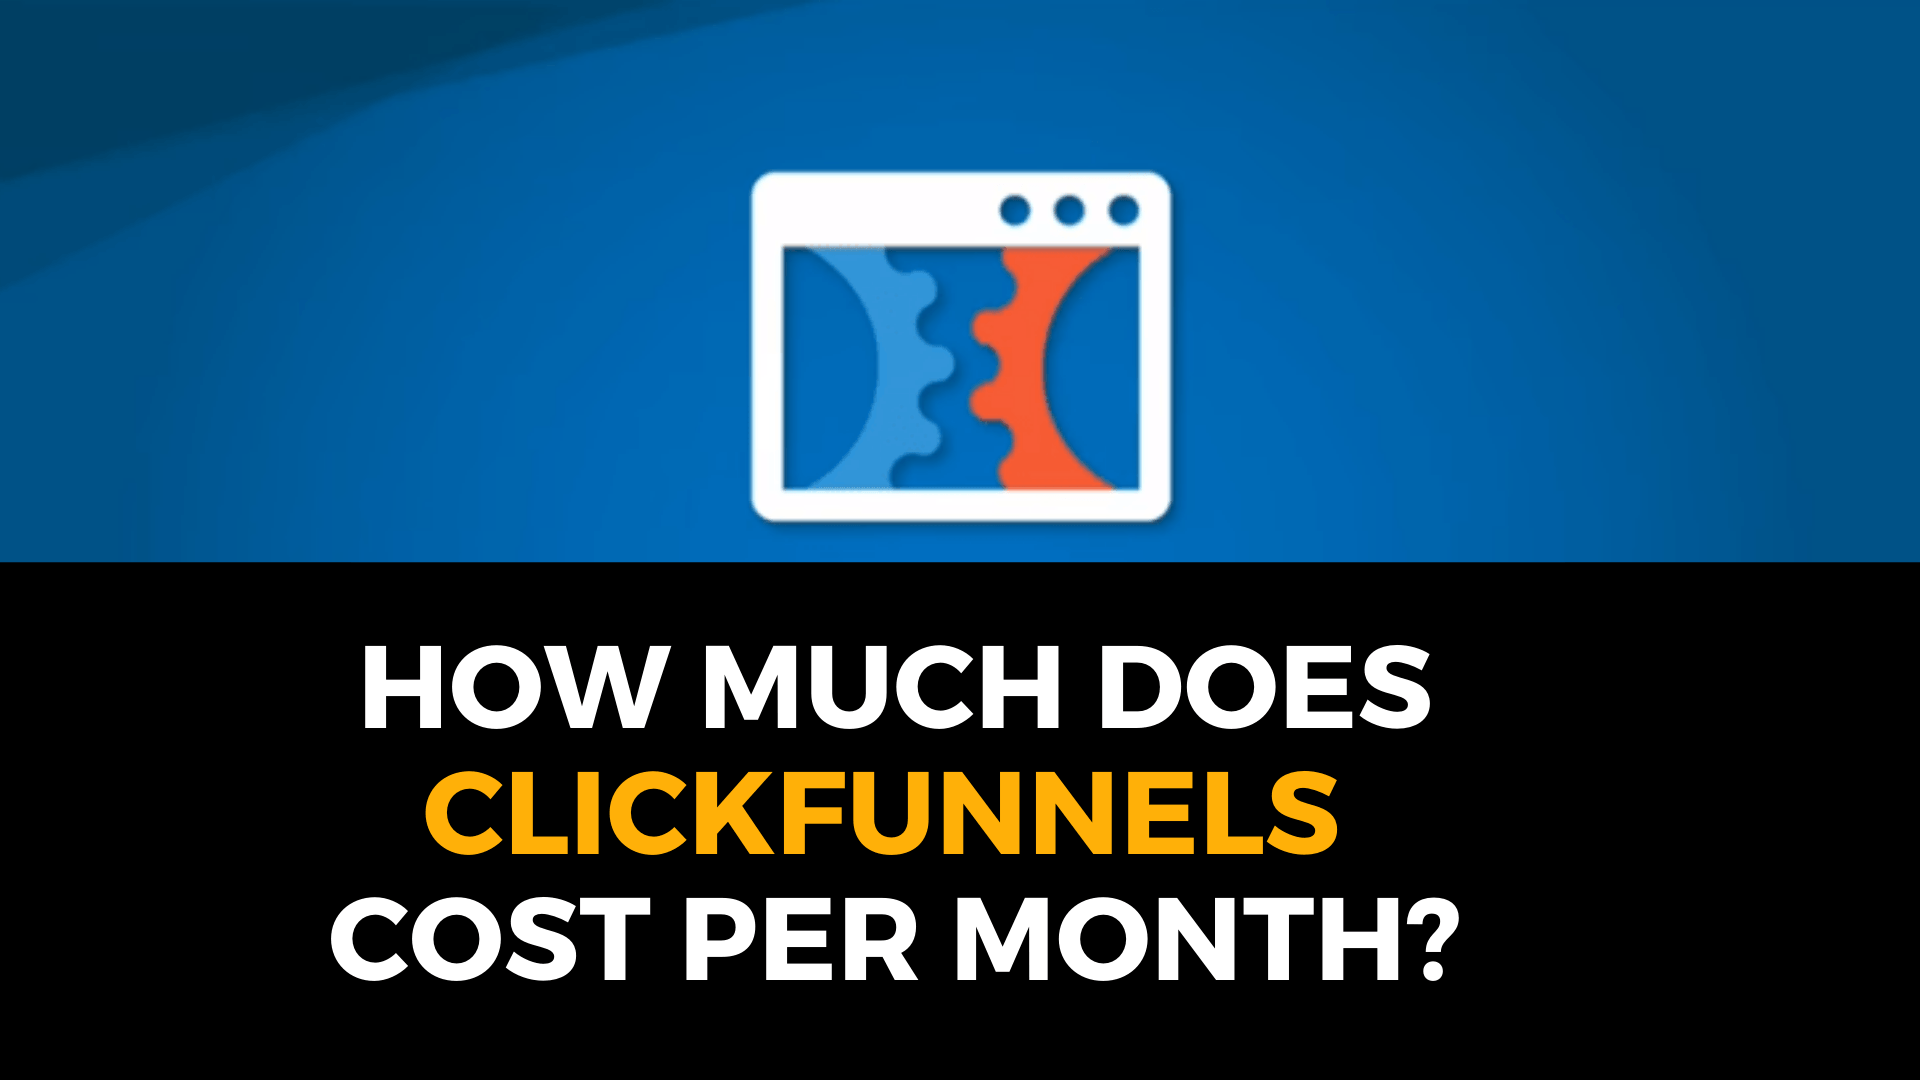 How much does ClickFunnels cost?